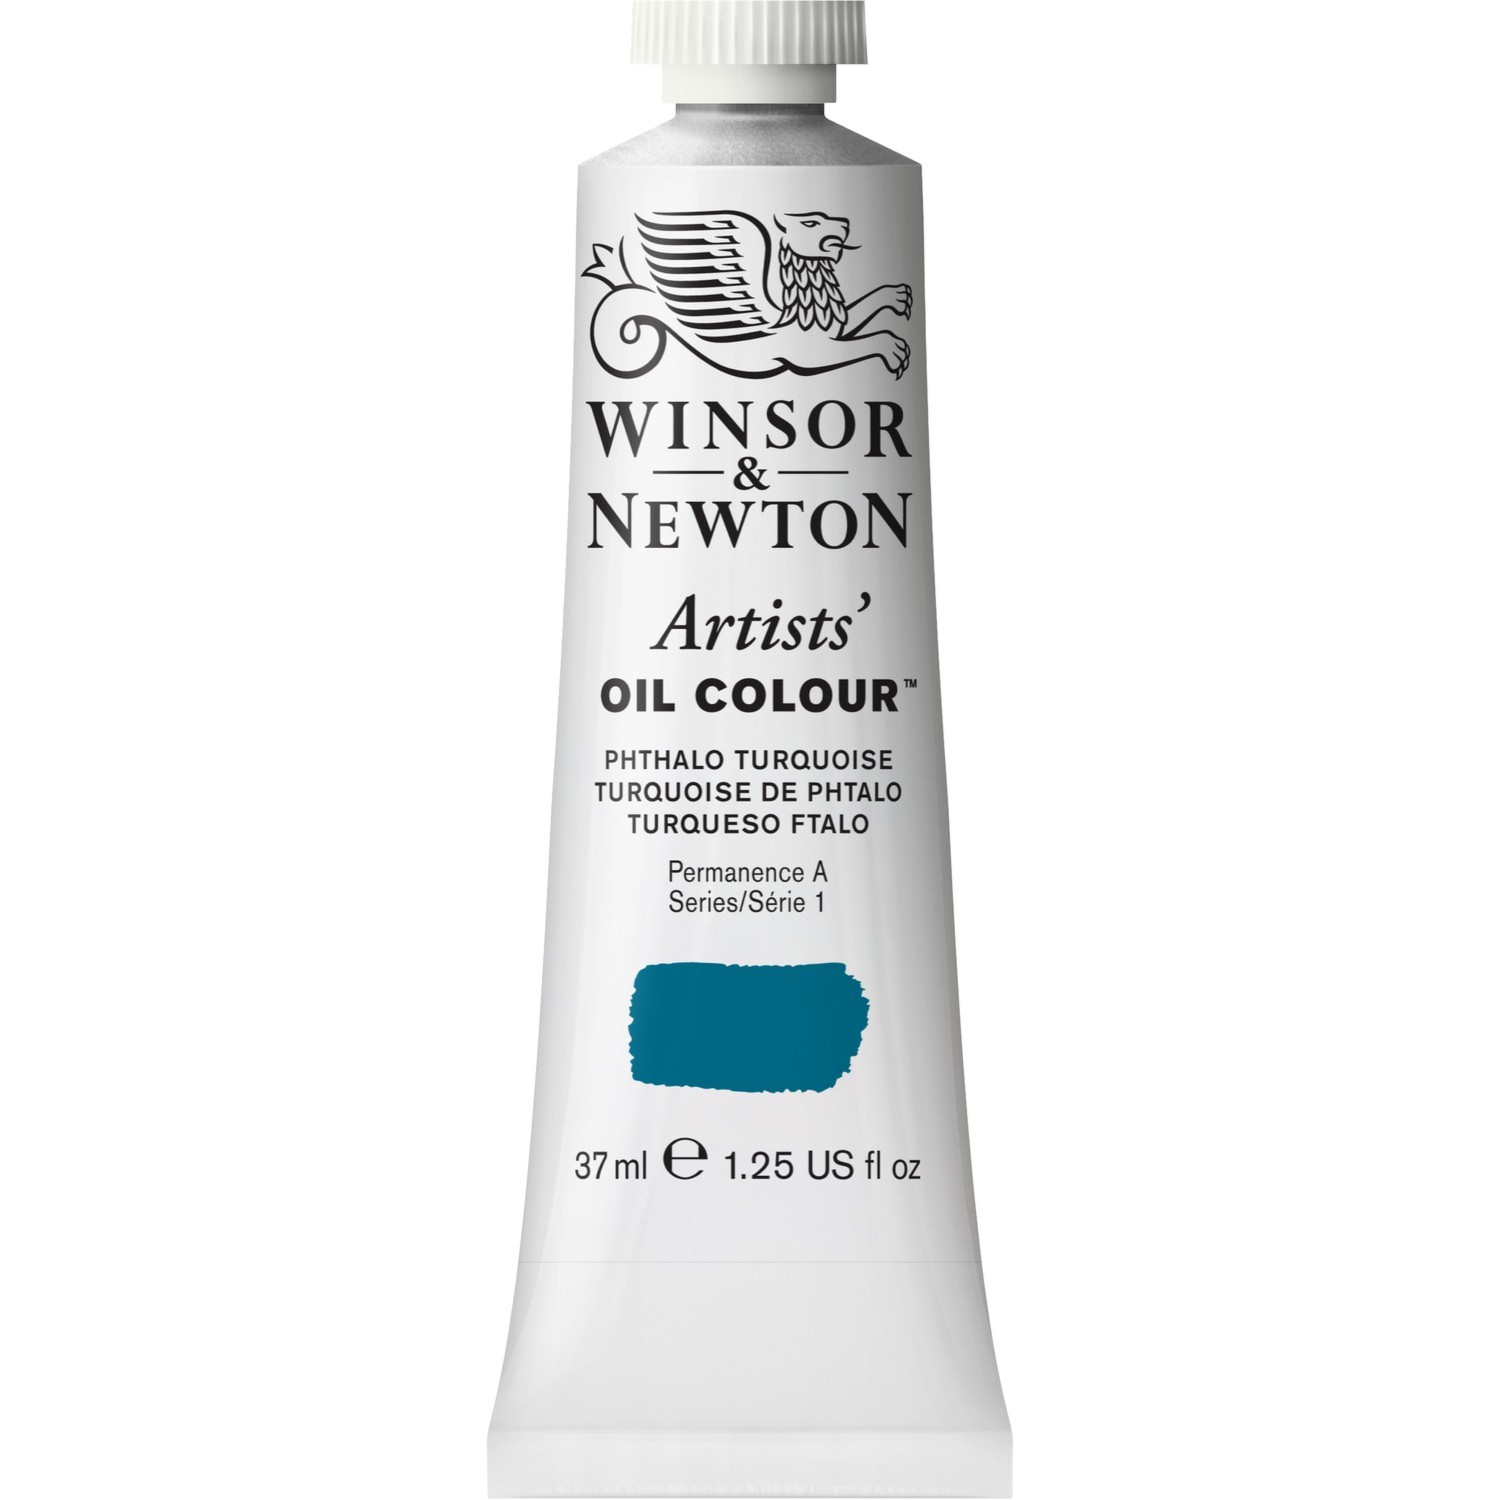 Winsor and Newton 37ml Artists' Oil Colours - Phthalo Turquoise Image 1